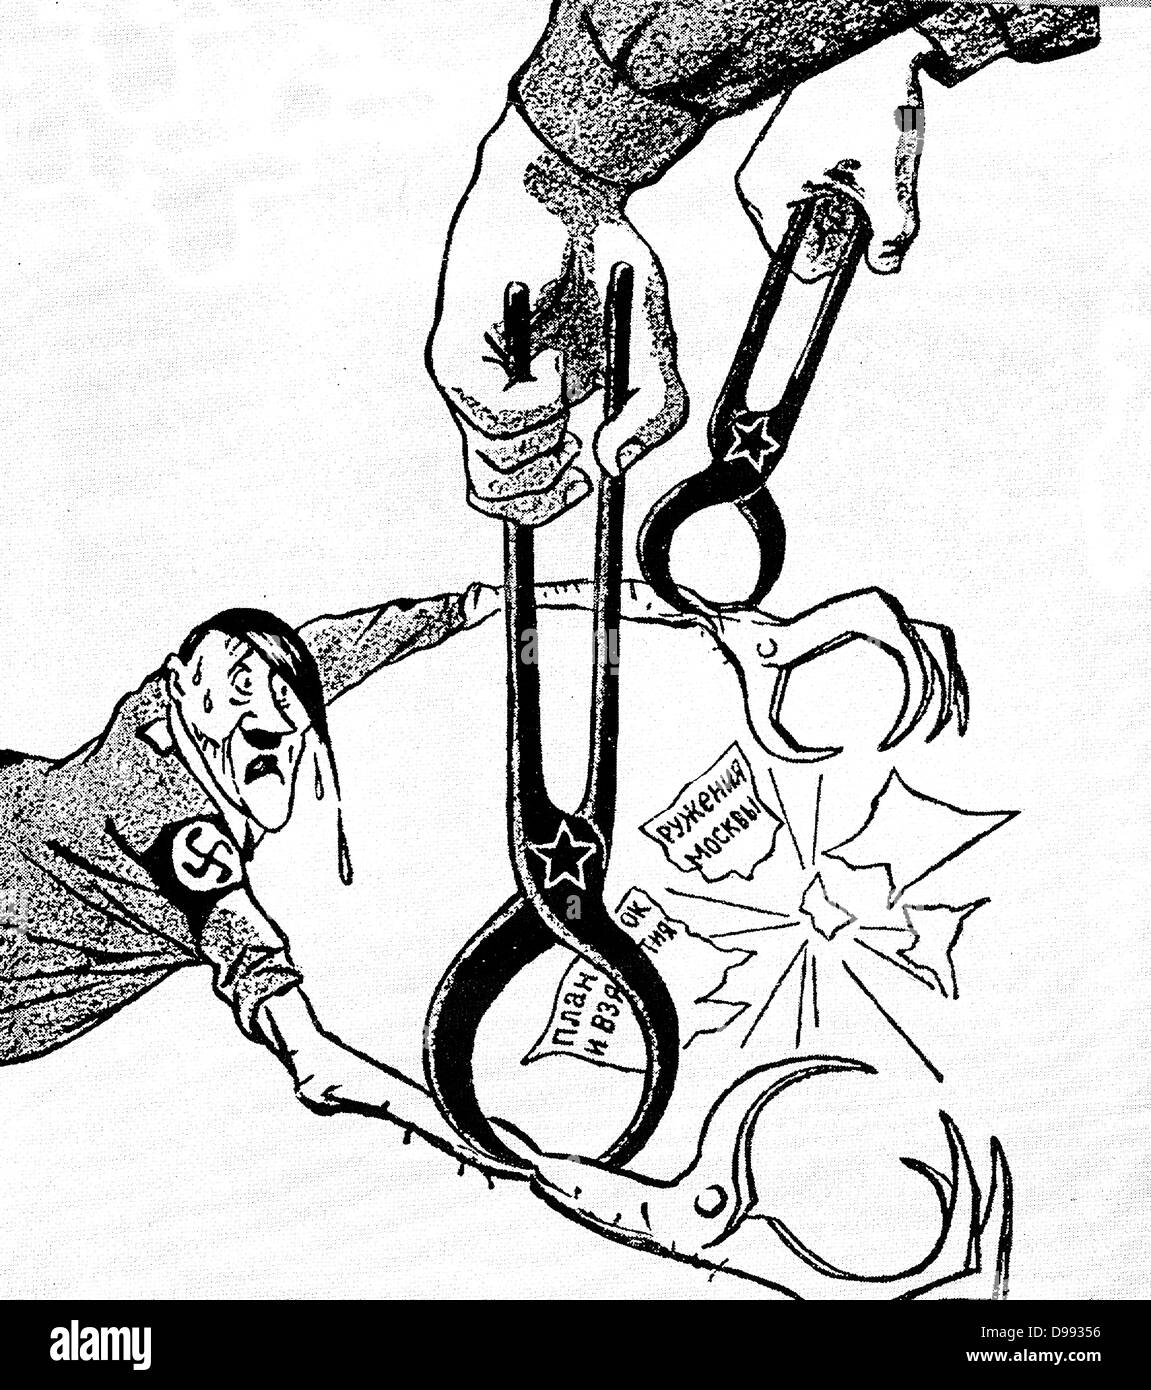 World War II: Operation Barbarossa, German invasion of USSR, launched June 1941. Russian cartoon, c1942, showing that Soviet pincers could stop Hitler's own pincer movements planned to grasp Russian territory. Stock Photo